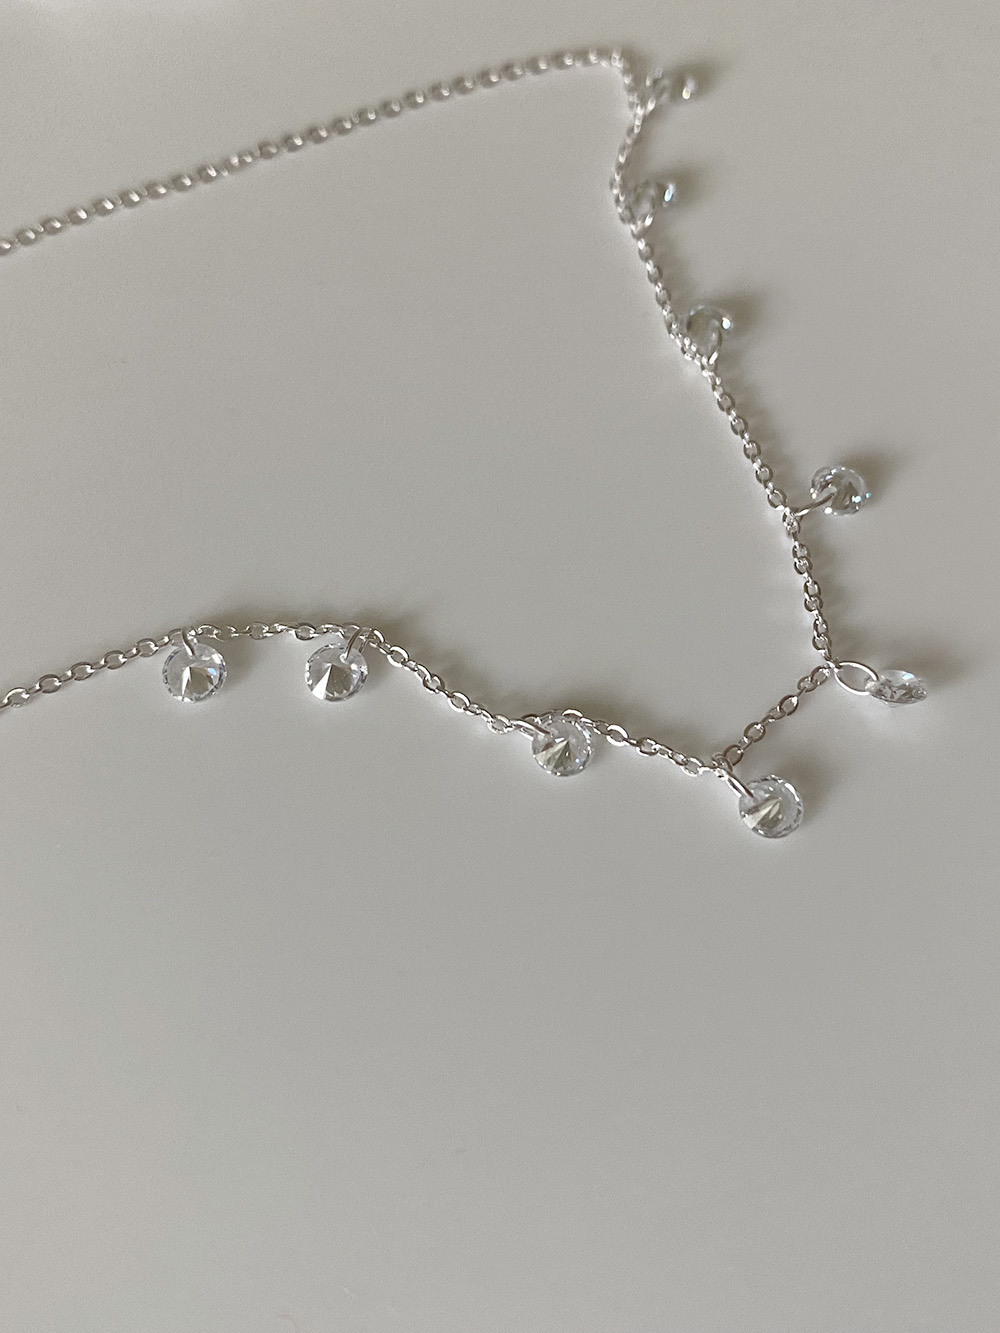 [92.5 silver] glass necklace